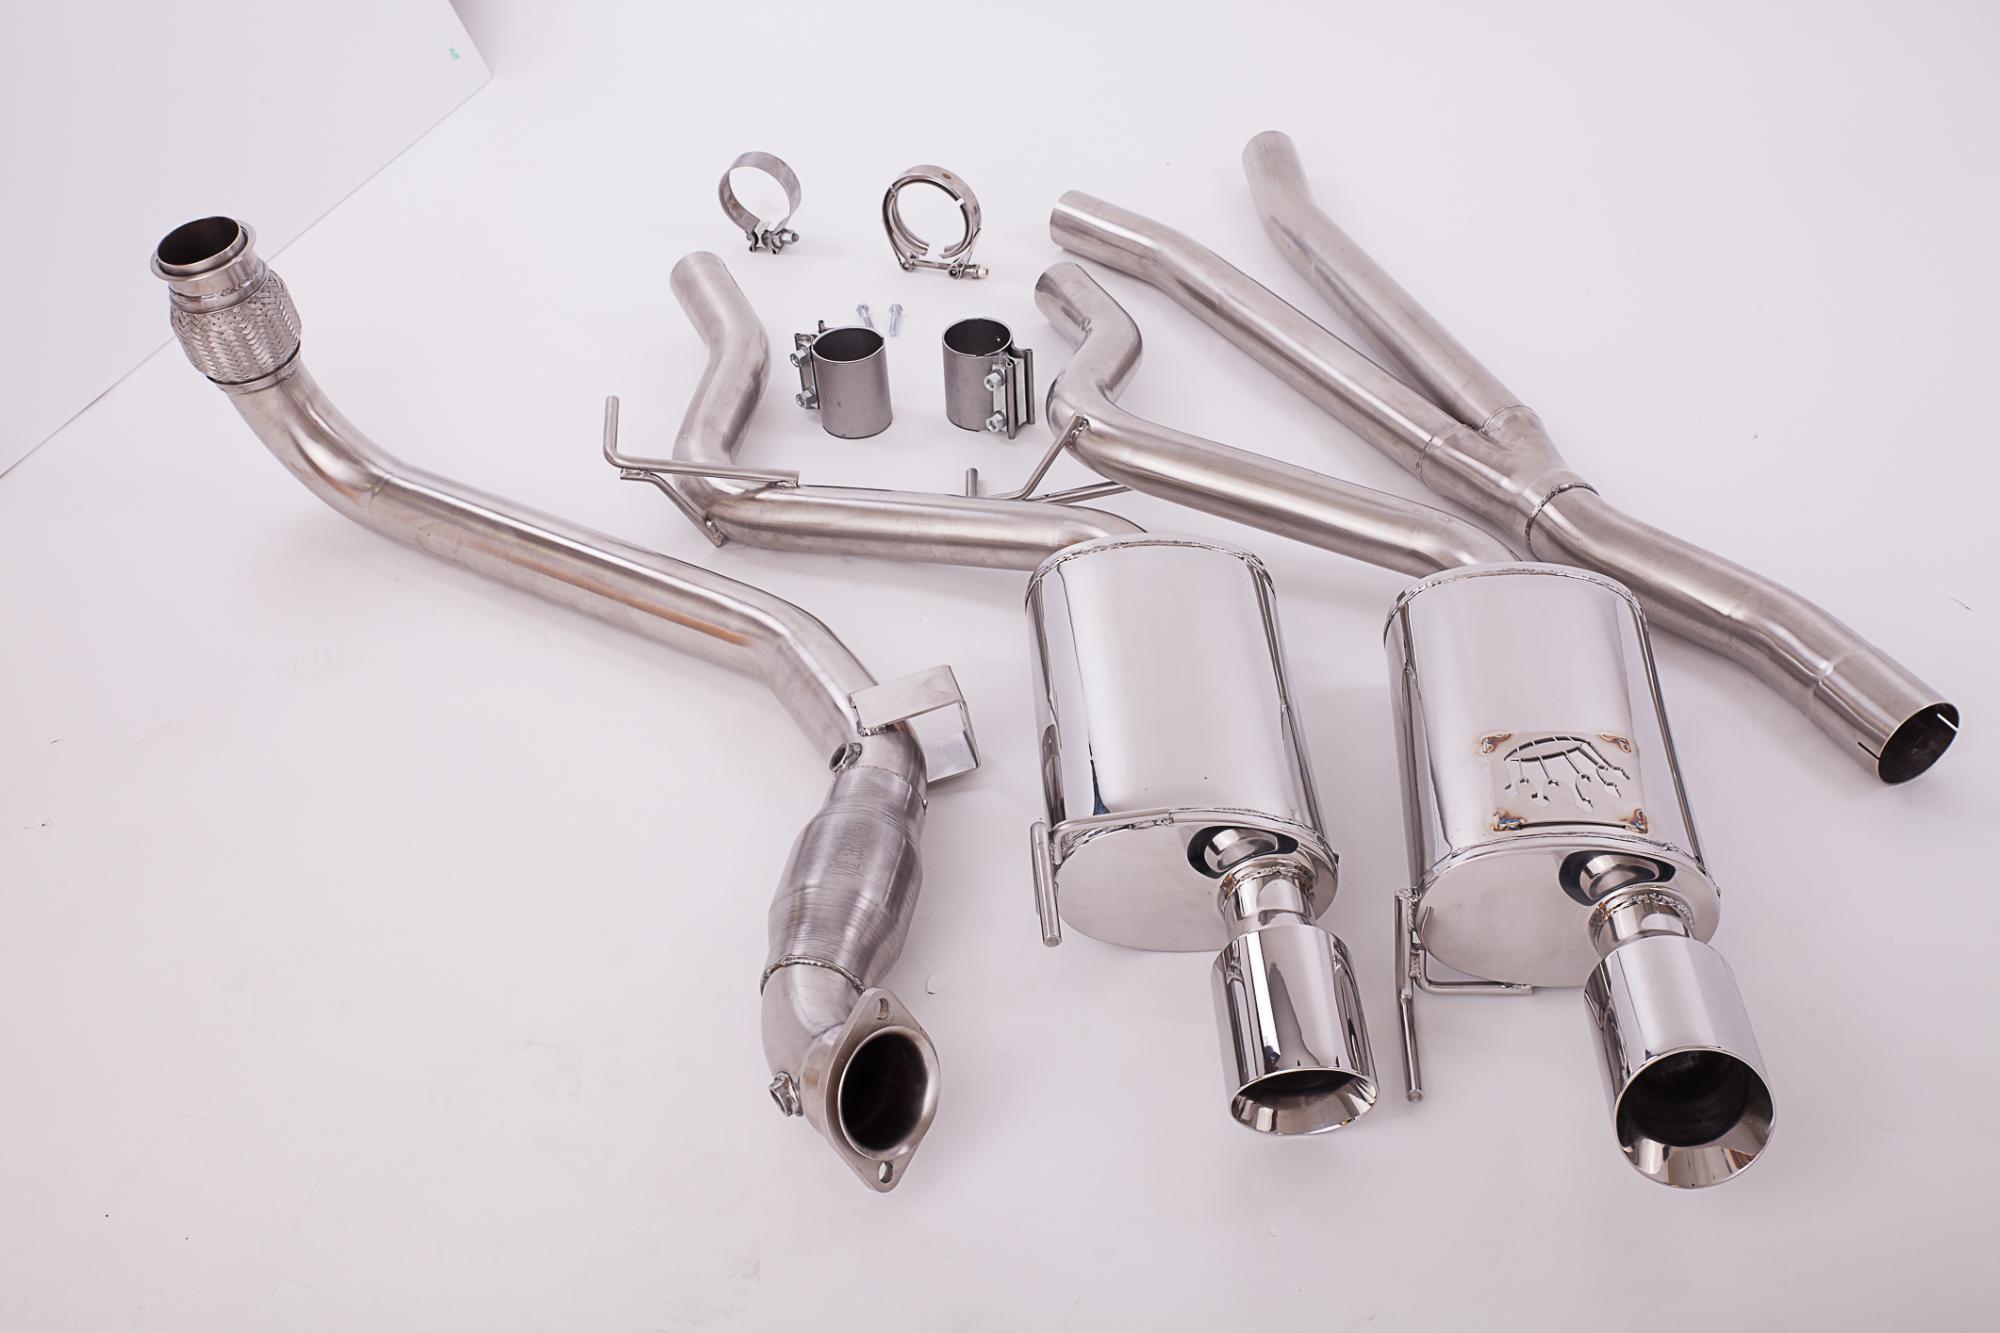 Krona Performance 2015+ Mustang EcoBoost Stainless Turboback Exhaust System w/o race catalyst